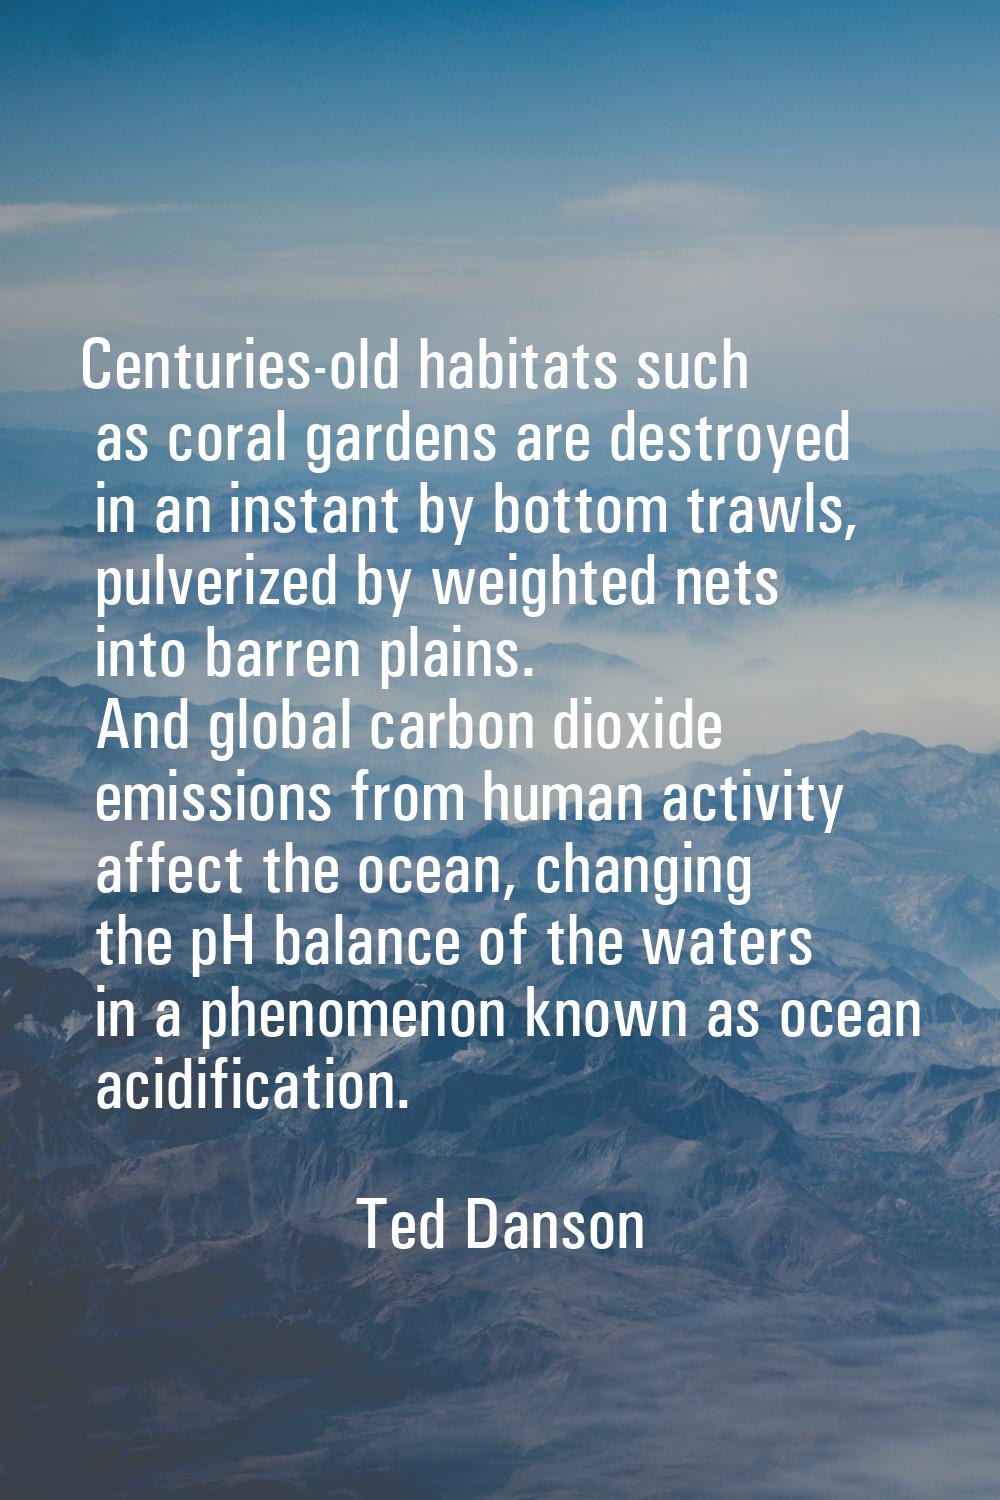 Centuries-old habitats such as coral gardens are destroyed in an instant by bottom trawls, pulveriz